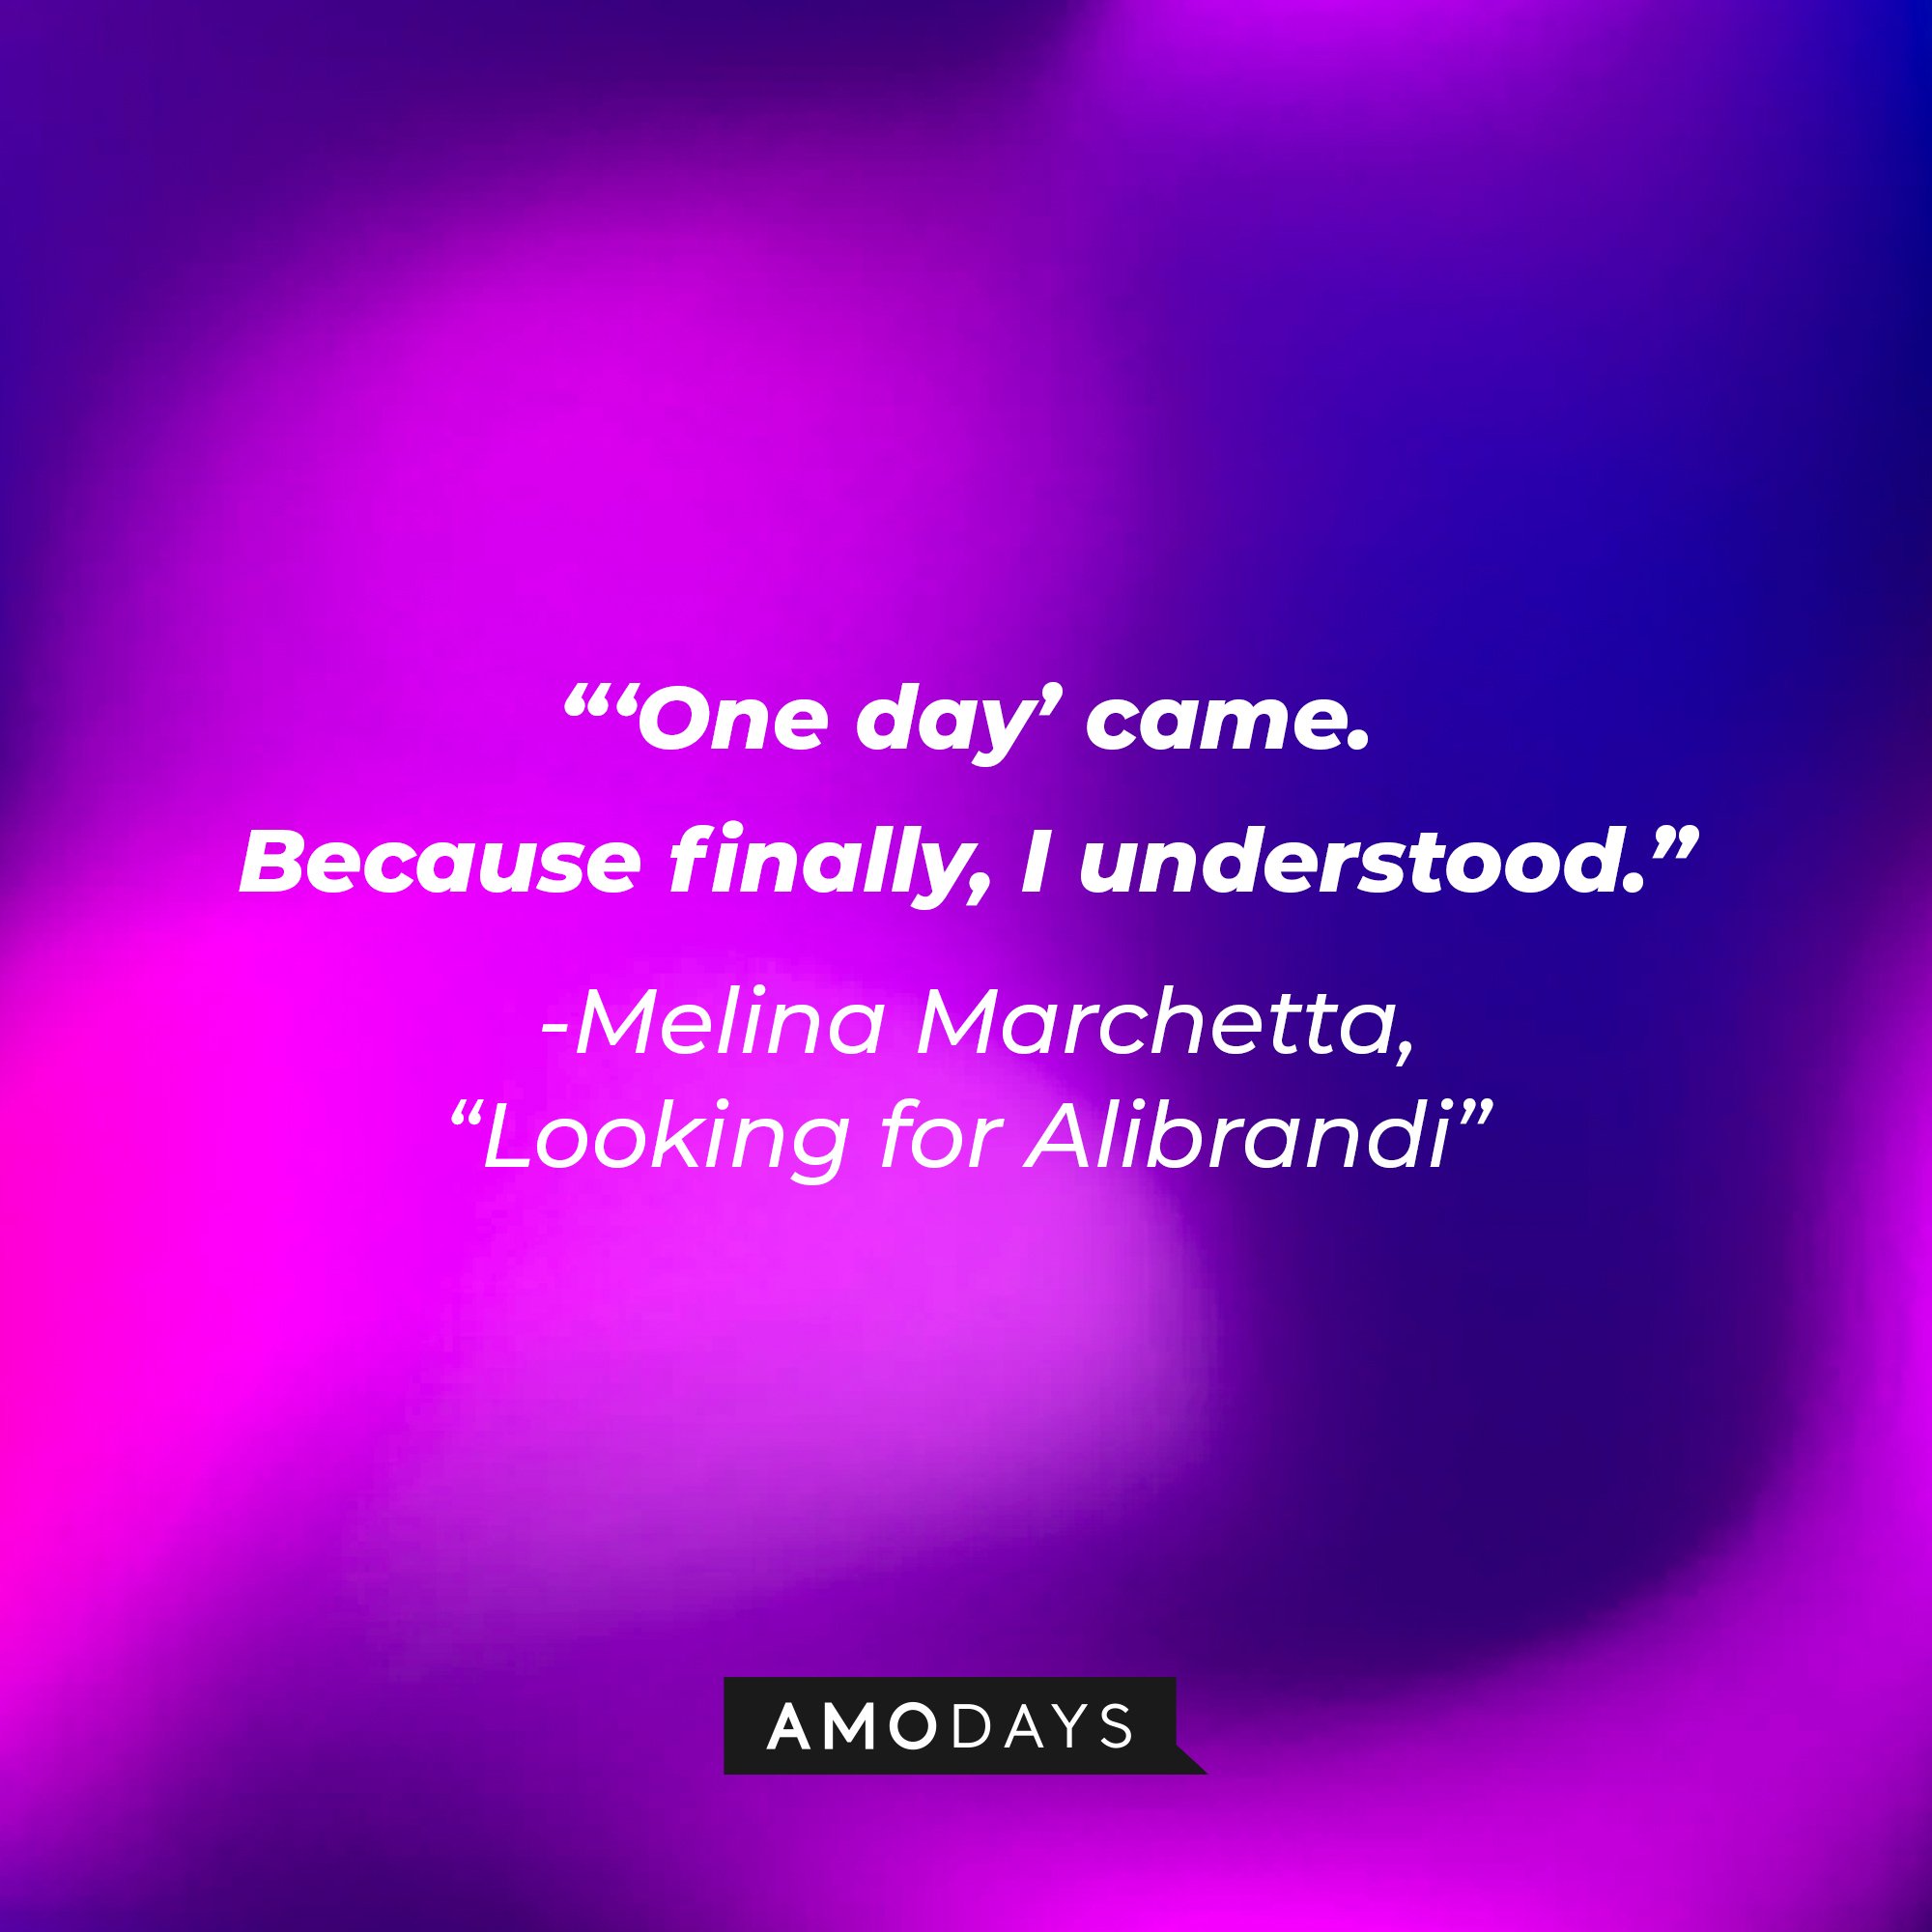 Melina Marchetta's "Looking for Alibrandi" quote: "One day" came. / Because finally I understood." | Image: AmoDays